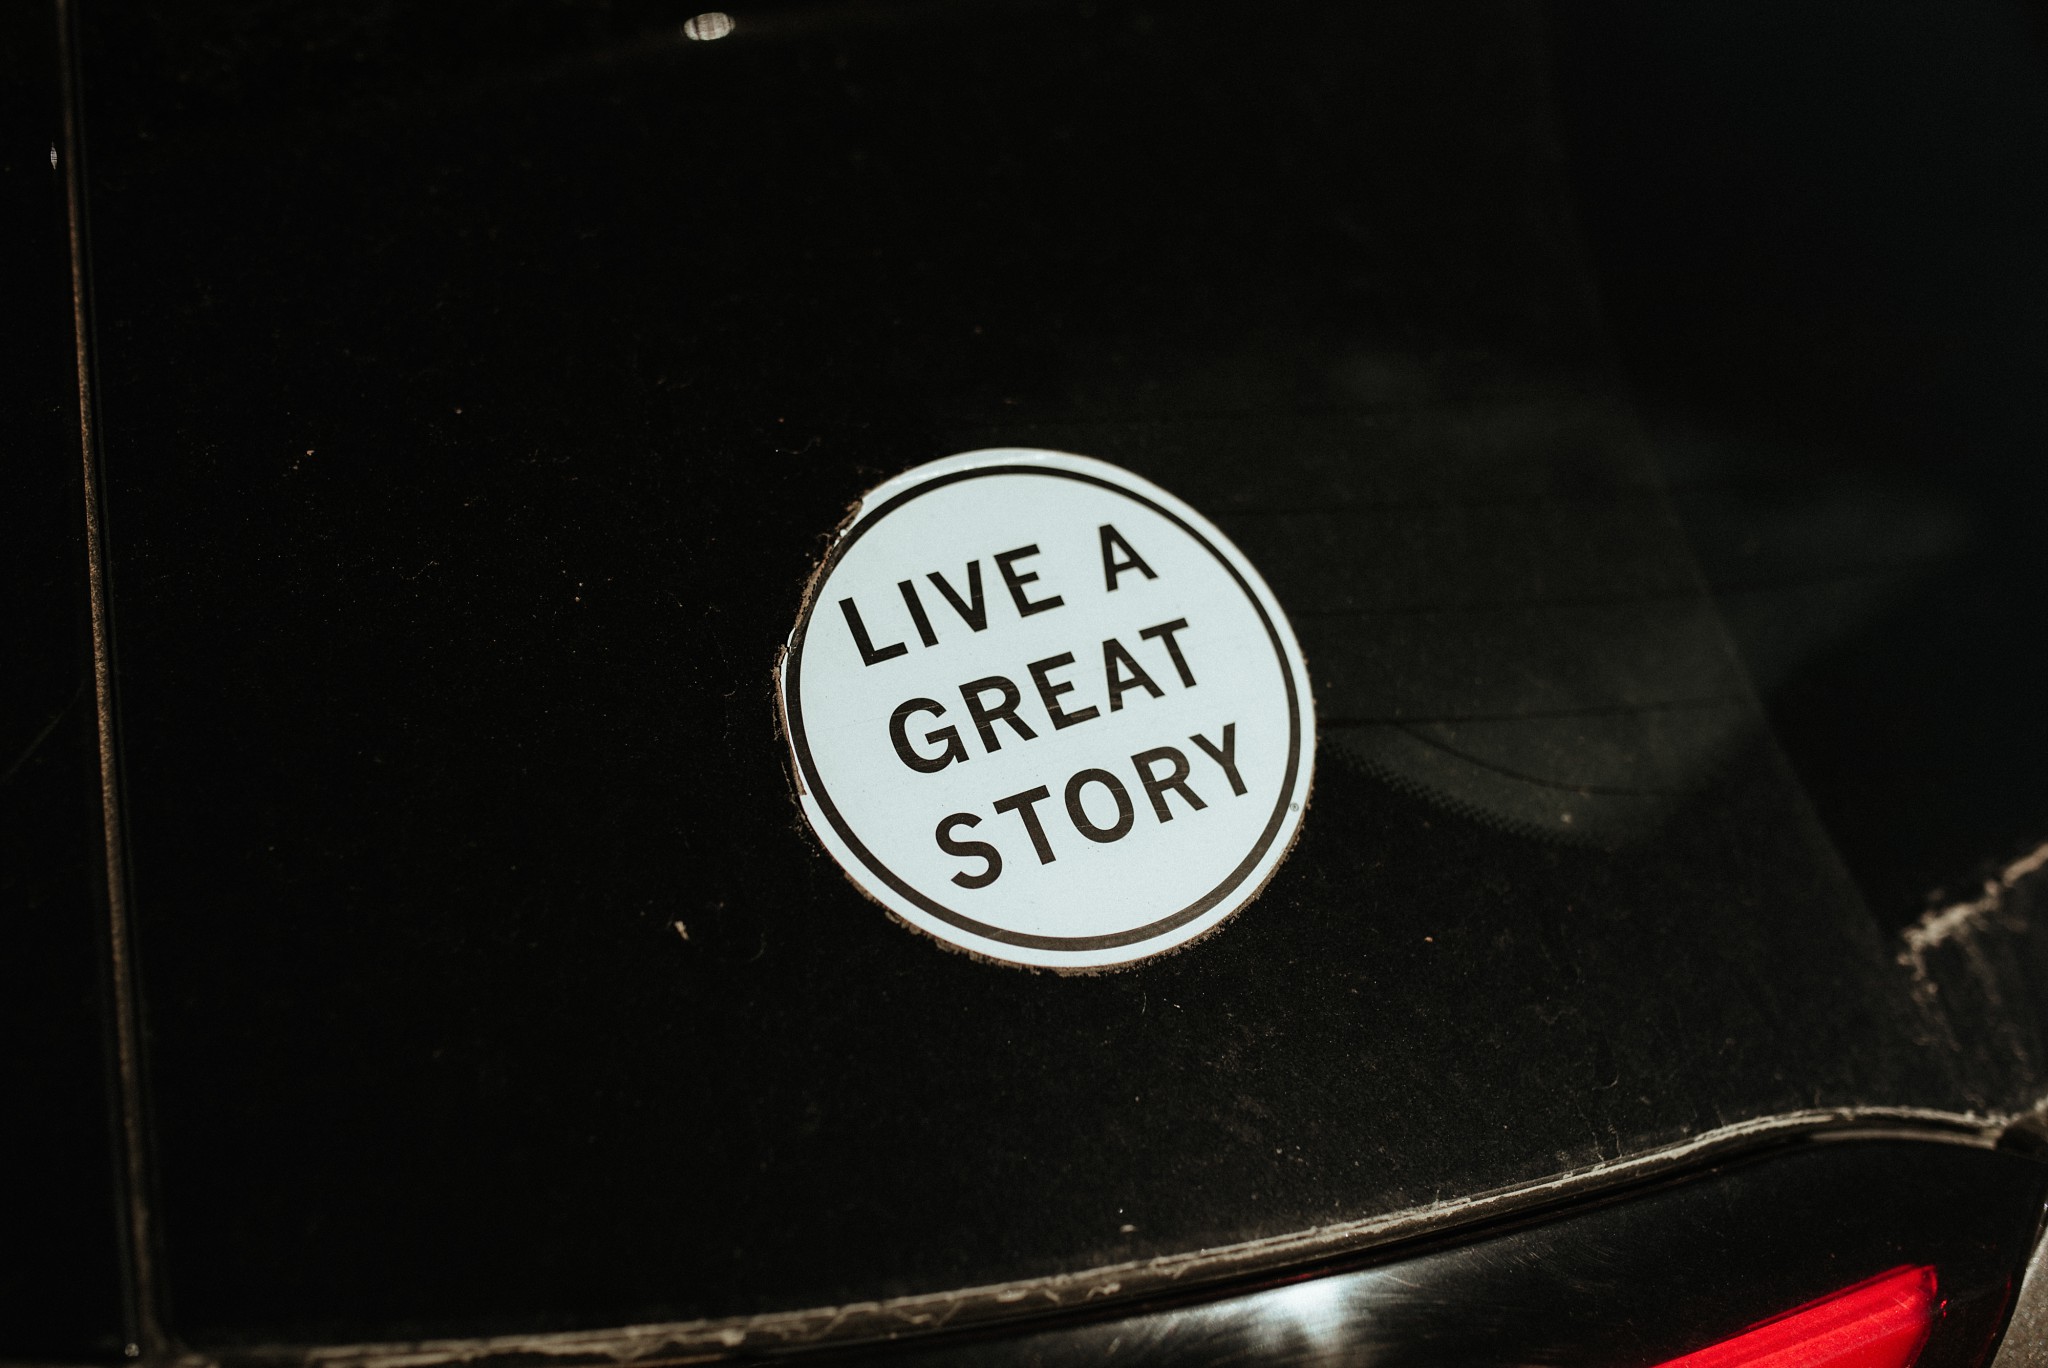 A sticker on their car: "Live a great story."